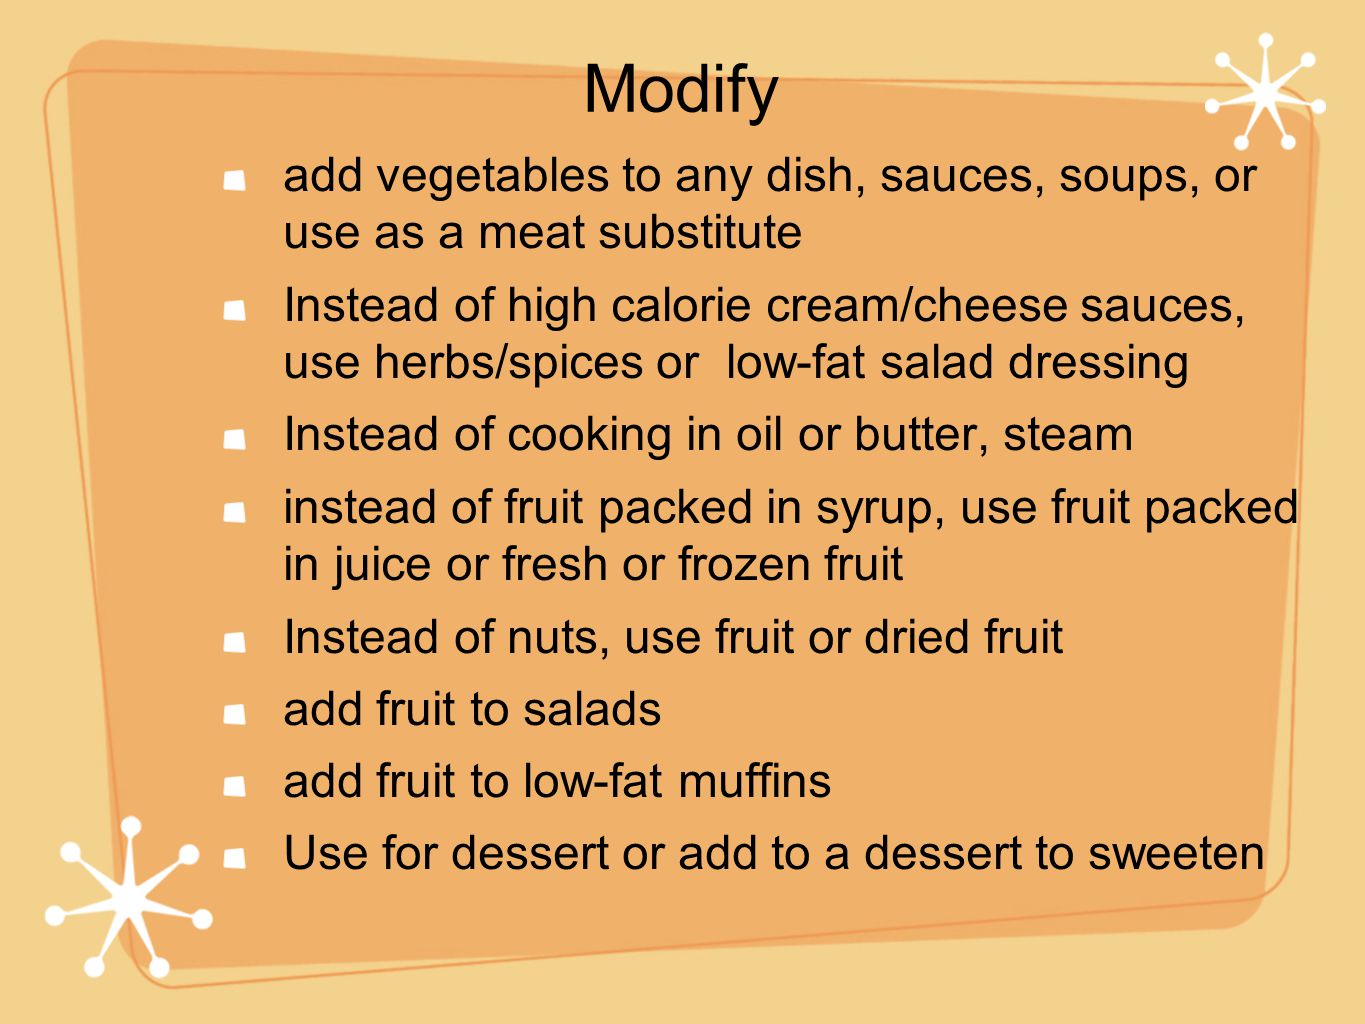 add vegetables to any dish, sauces, soups, or use as a meat substitute Instead of high calorie cream/cheese sauces, use herbs/spices or low-fat salad dressing Instead of cooking in oil or butter, steam instead of fruit packed in syrup, use fruit packed in juice or fresh or frozen fruit Instead of nuts, use fruit or dried fruit add fruit to salads add fruit to low-fat muffins Use for dessert or add to a dessert to sweeten Modify